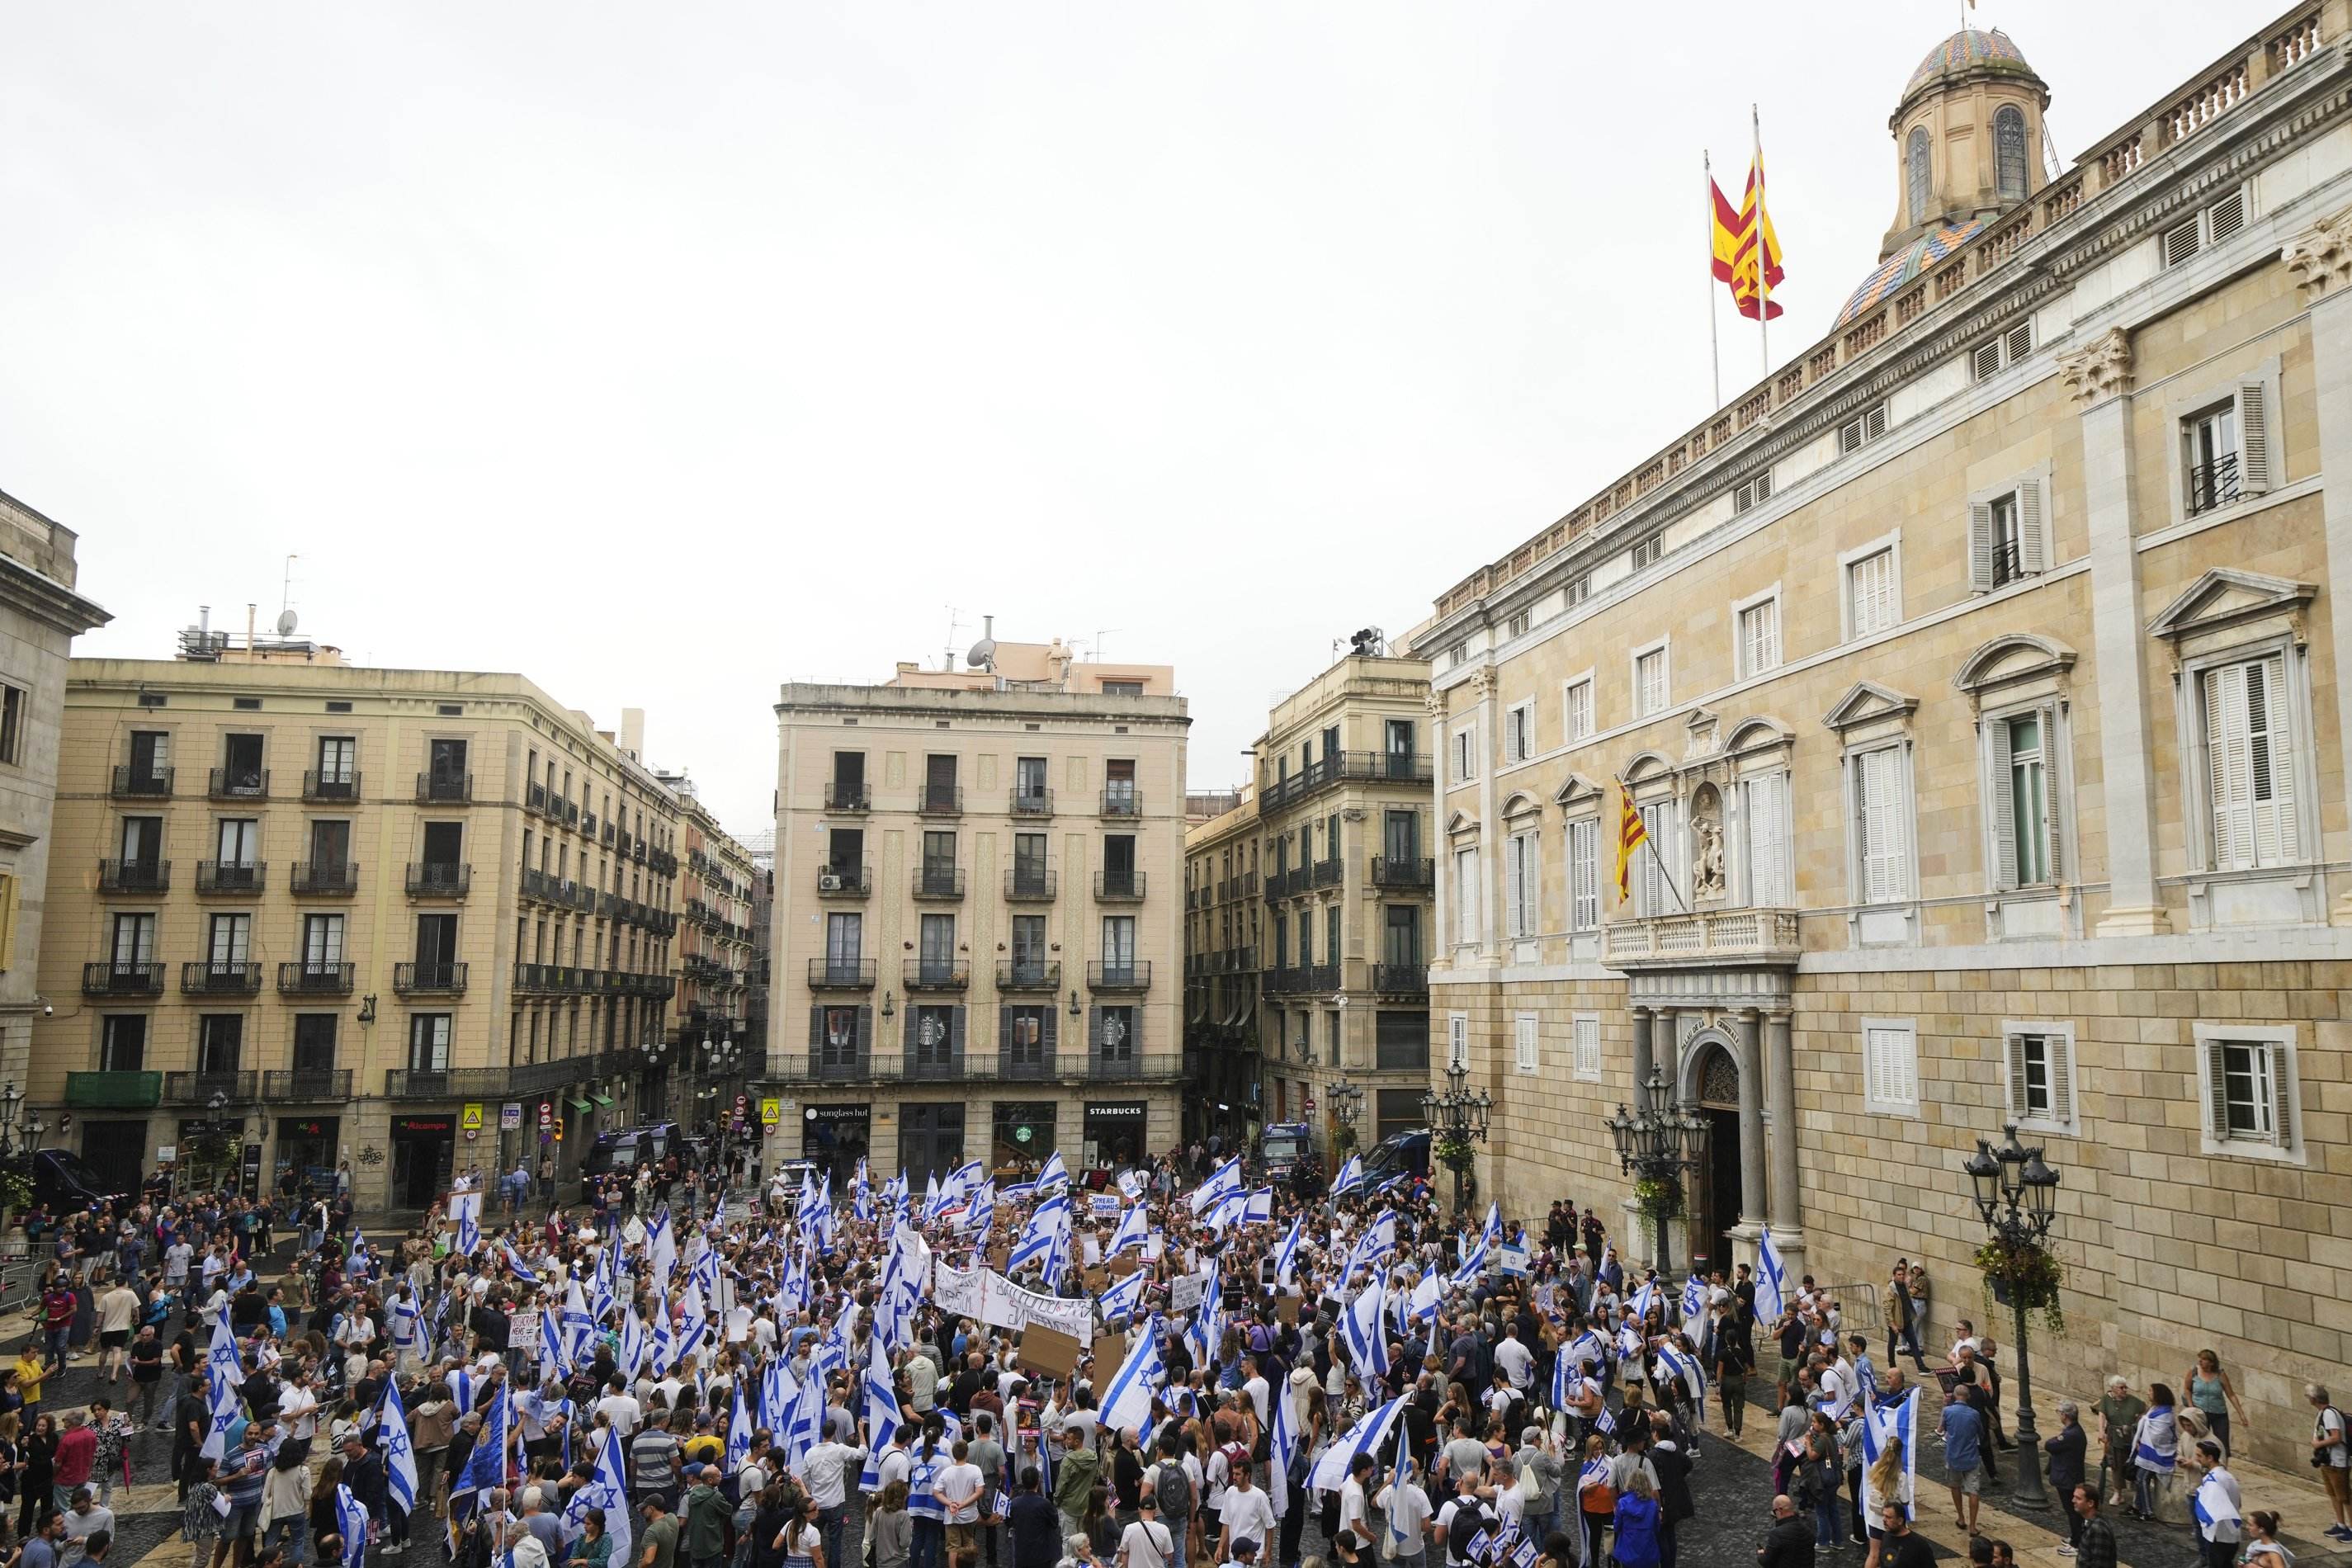 Barcelona, equidistant under Collboni: pro-Israel motion passed, pro-Palestine petition accepted